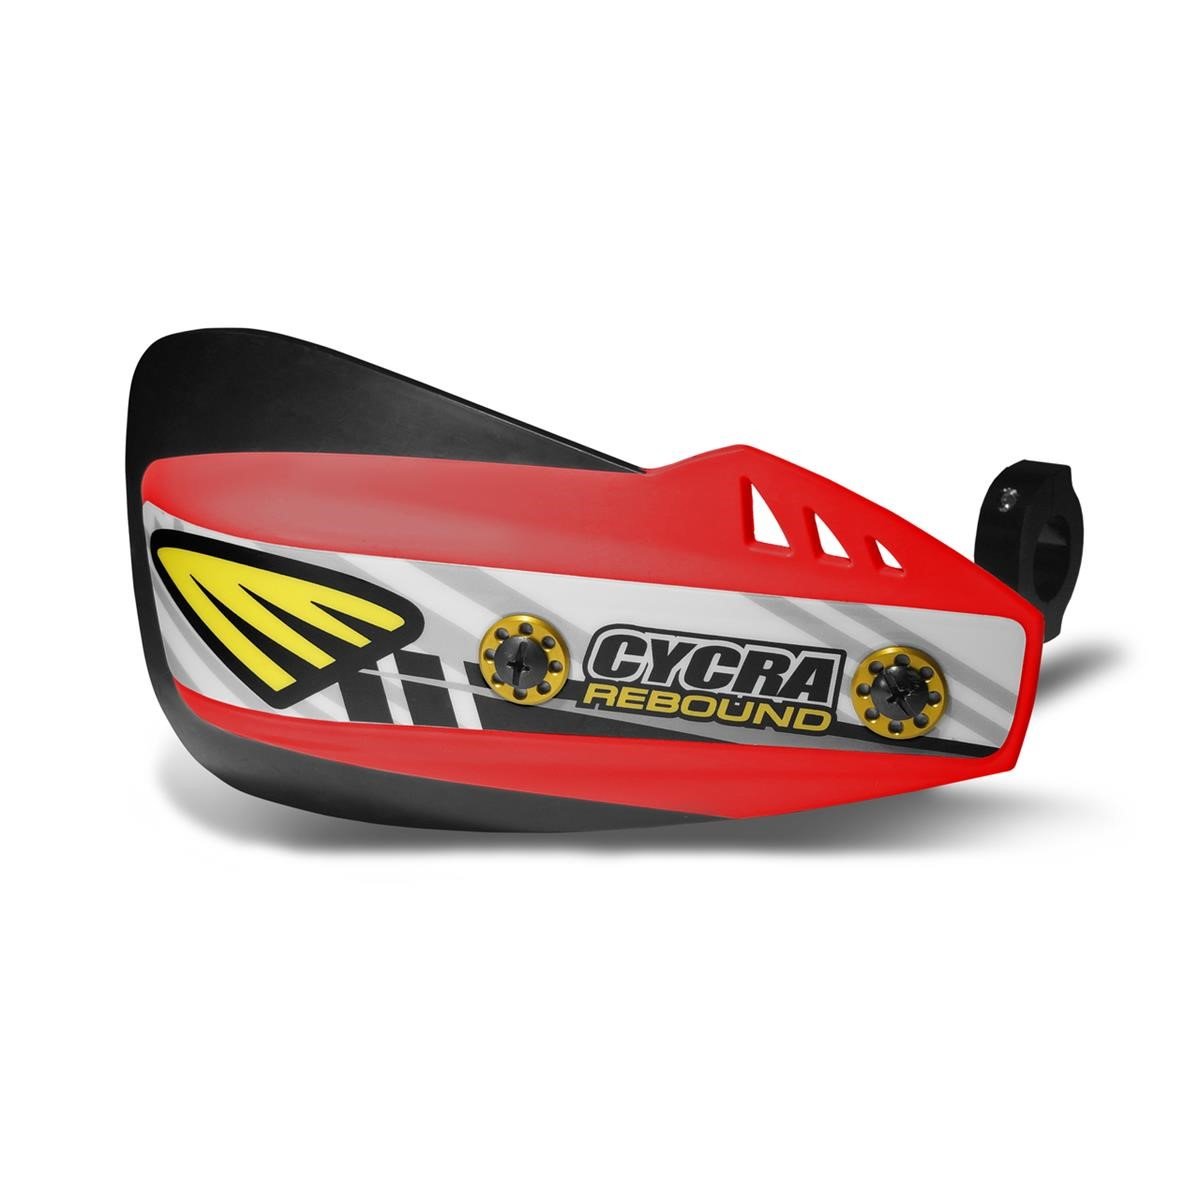 Cycra Handguards Rebound with Patented folding shield, Red